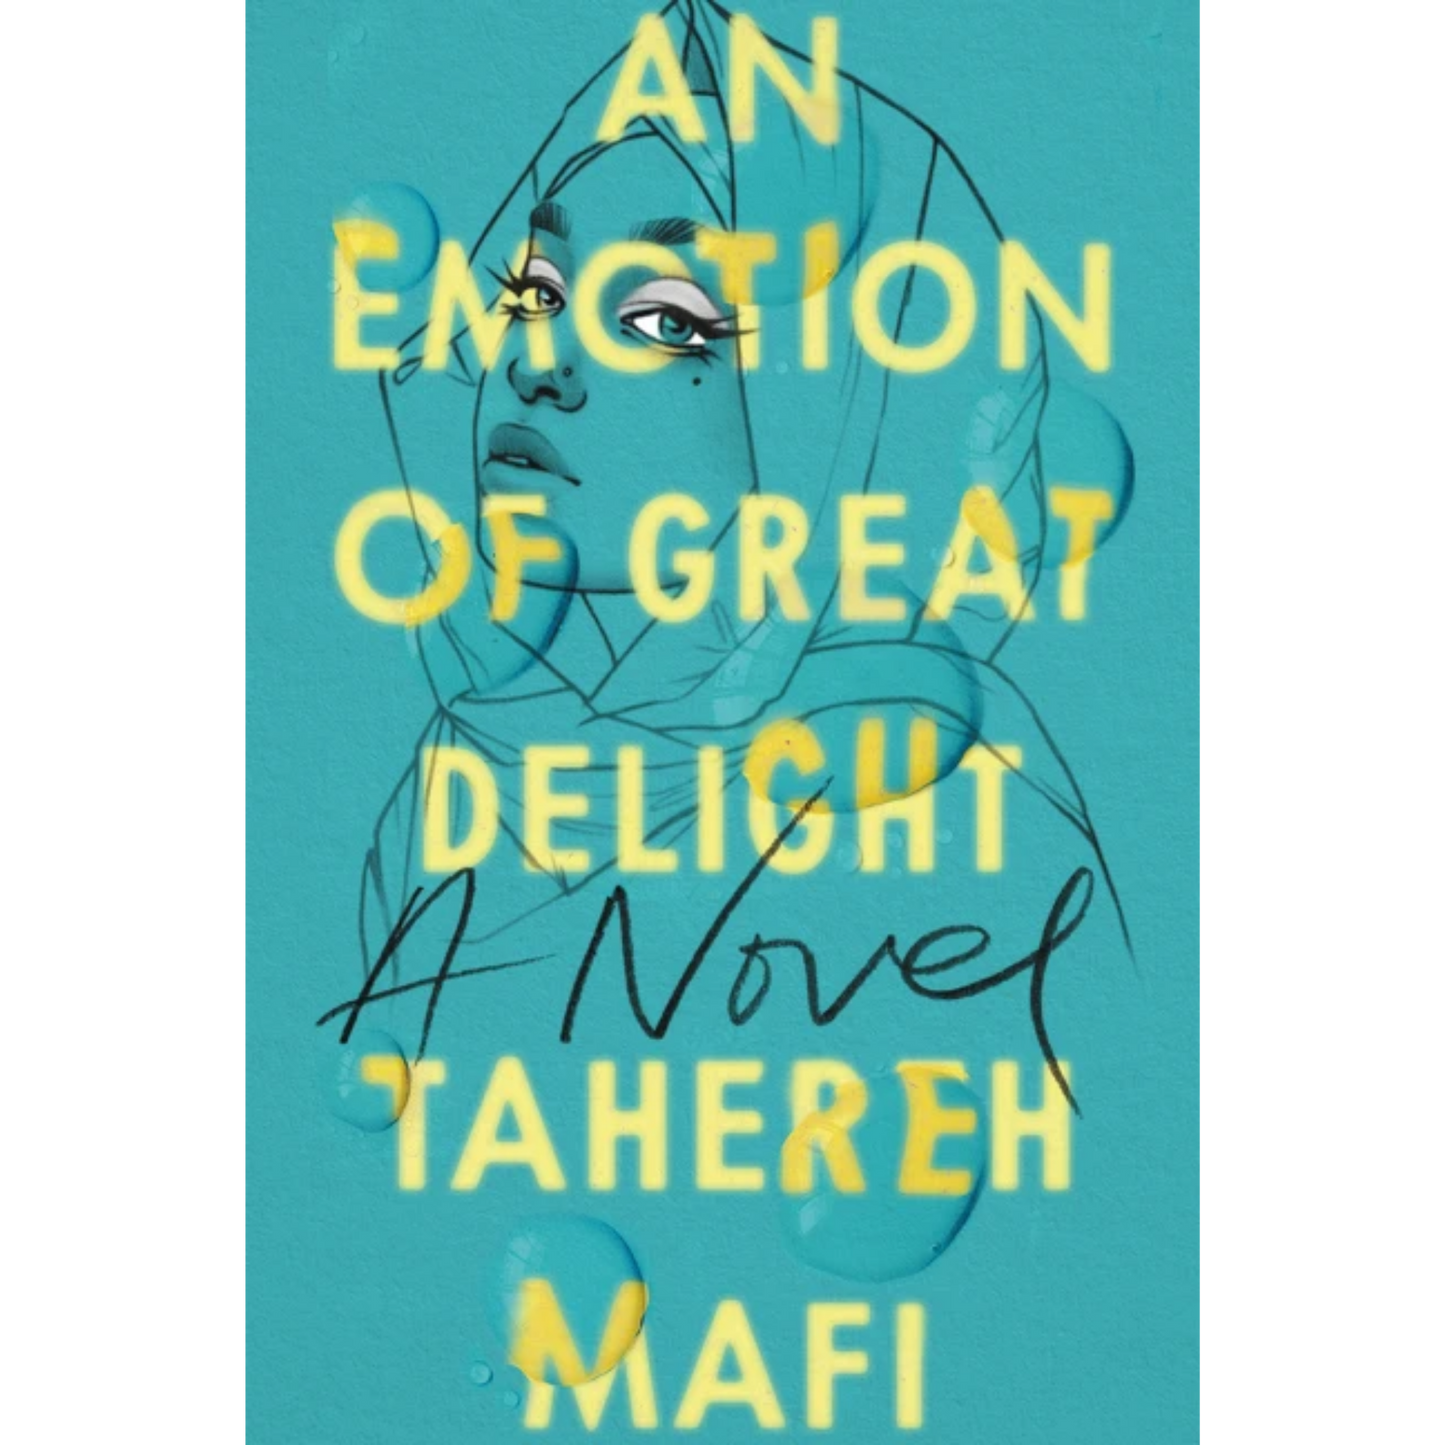 an emotion of great delight tahereh mafi